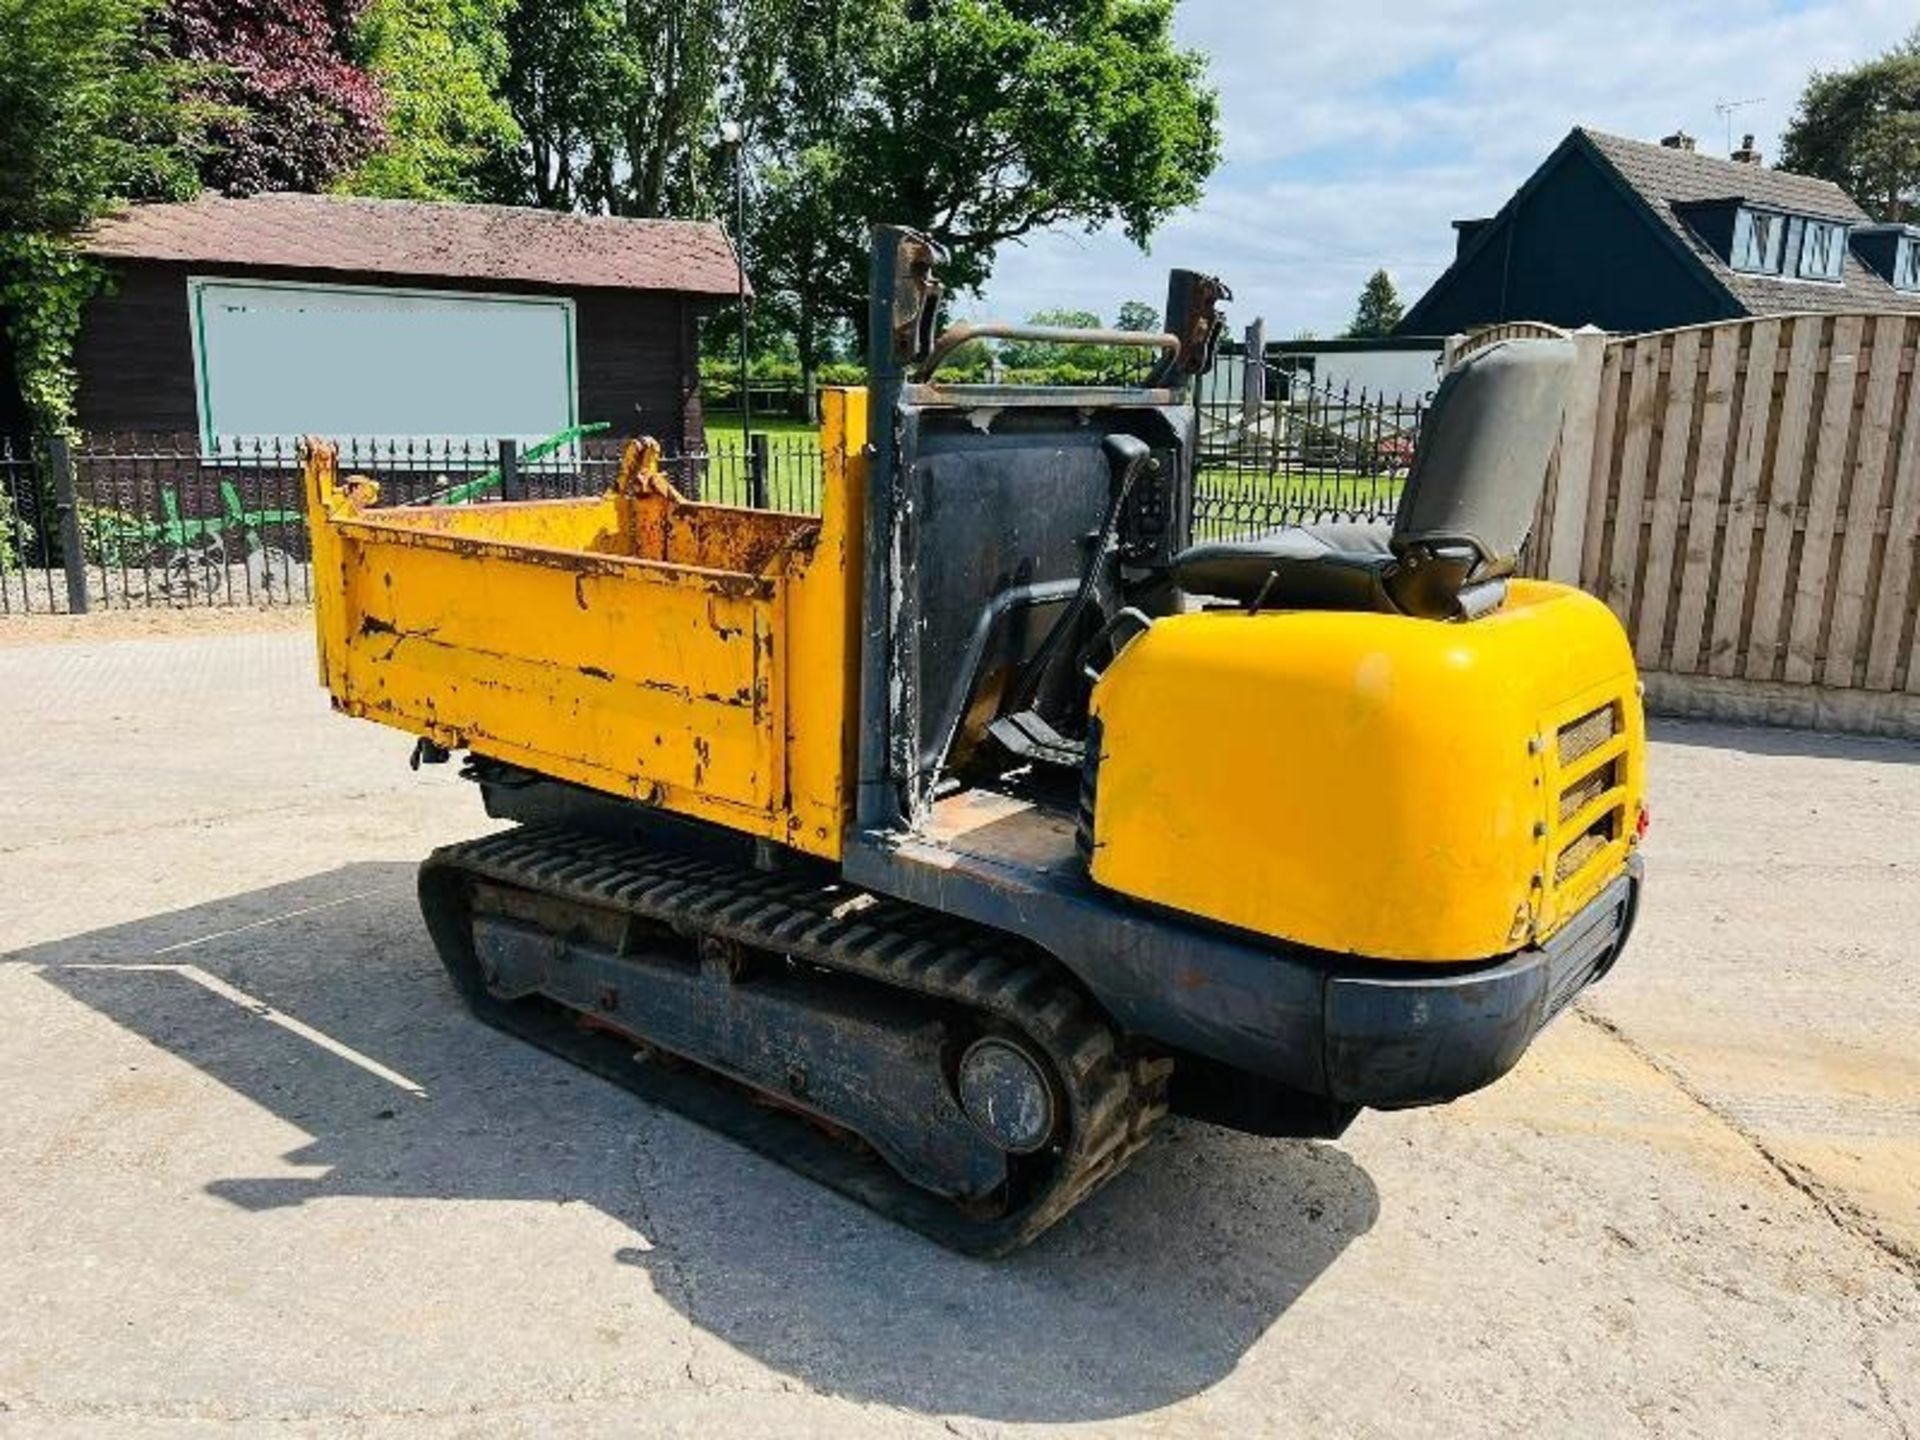 TRACKED DUMPER C/W DROP SIDE'S TIPPING BODY & RUBBER TRACKS